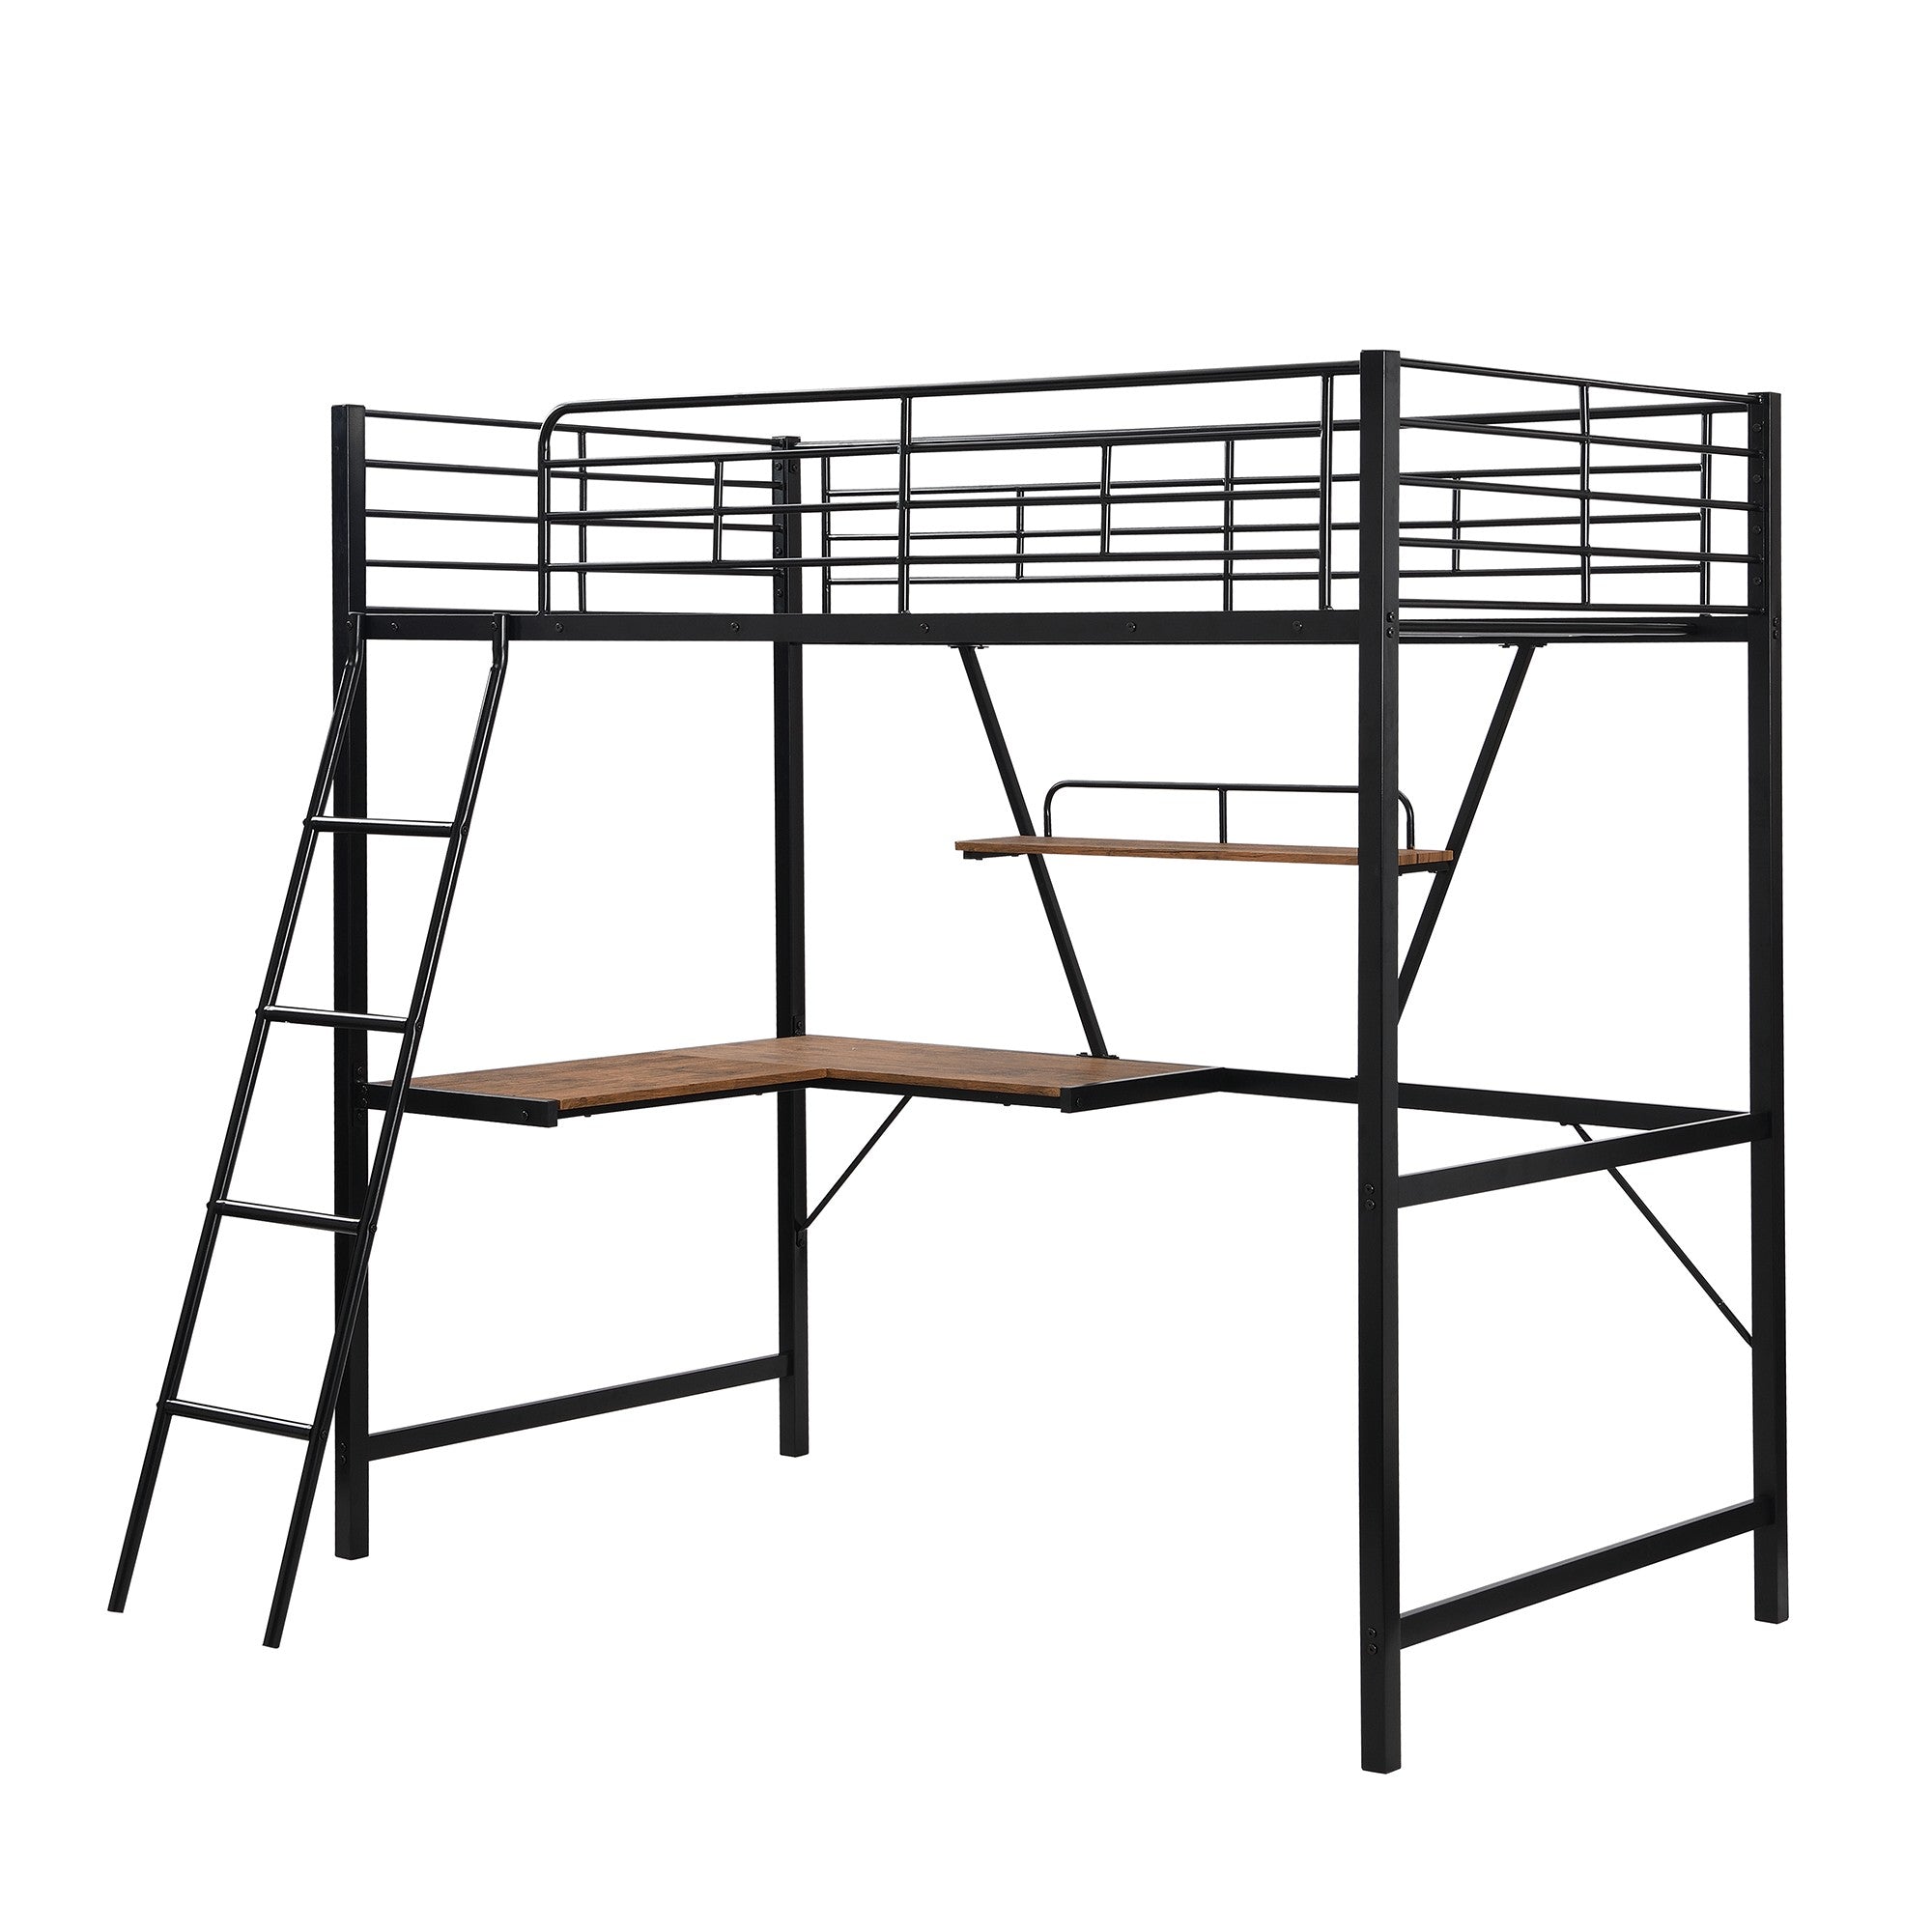 Black Metal Loft Bed with L Shaped Desk and Shelf - Tuesday Morning-Loft Beds